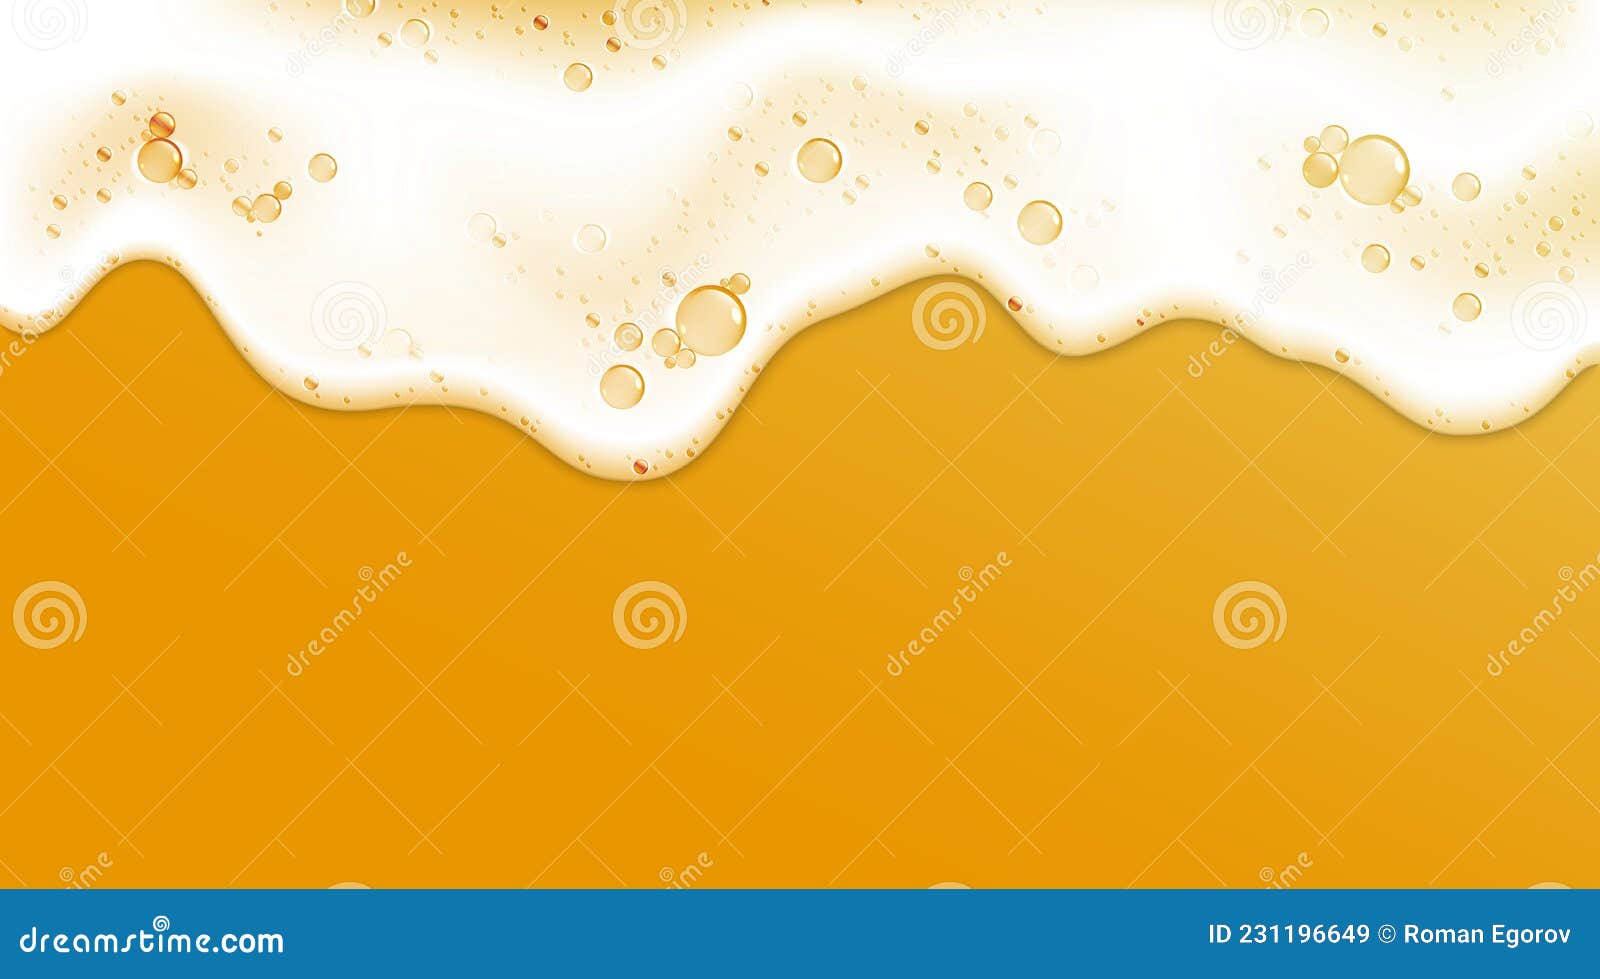 beer foam. realistic 3d frame with white clean shampoo froth and soap bubbles. detergent liquid lather. alcohol foamy